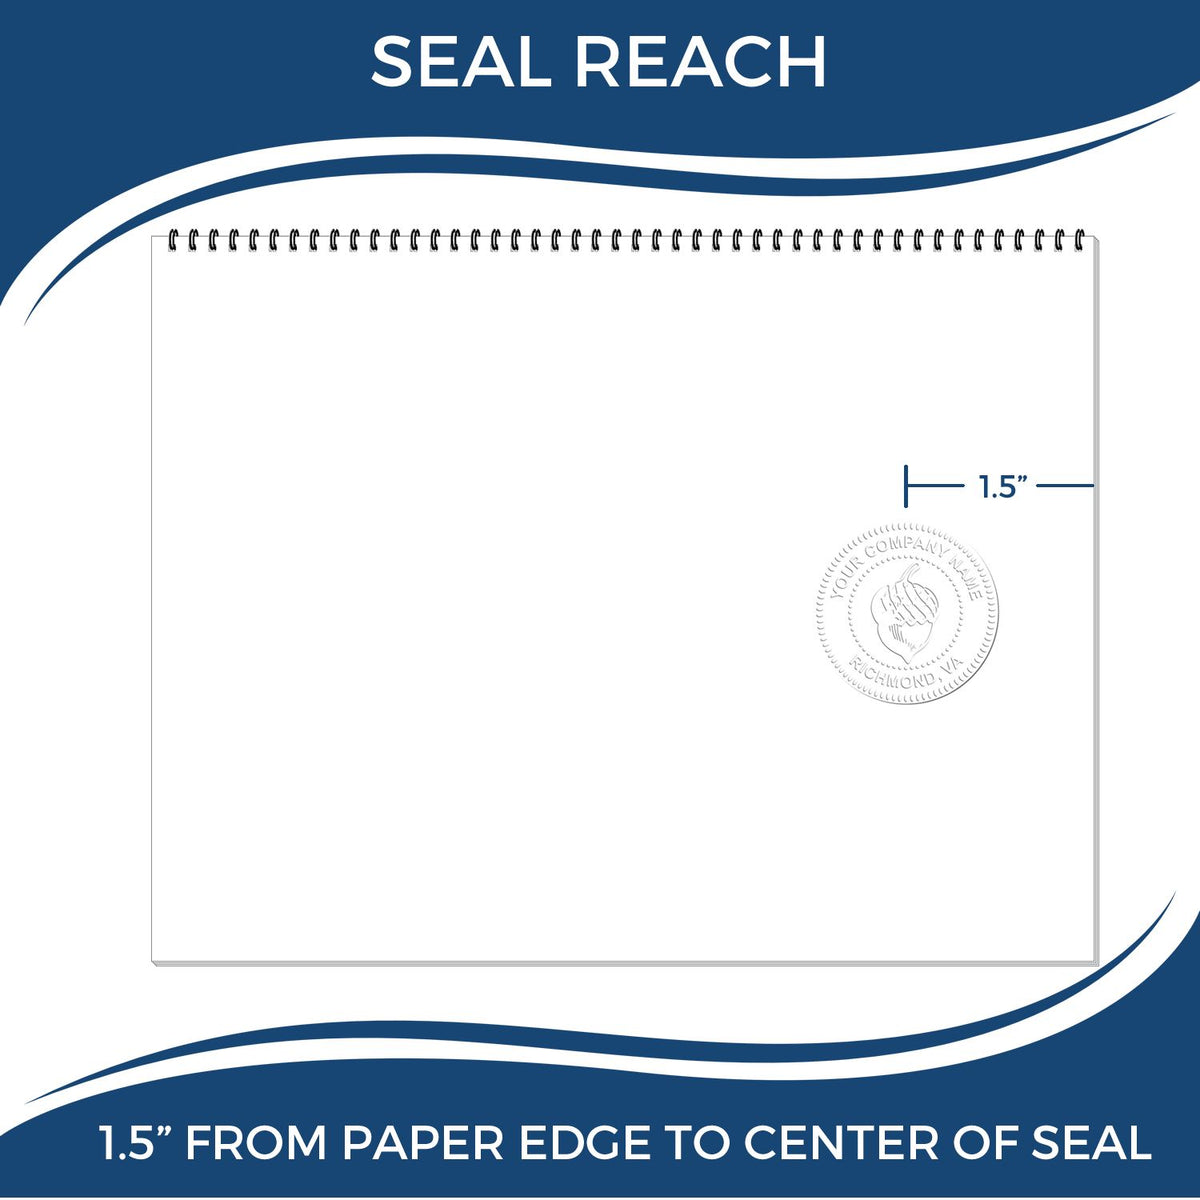 An infographic showing the seal reach which is represented by a ruler and a miniature seal image of the Ohio Engineer Desk Seal